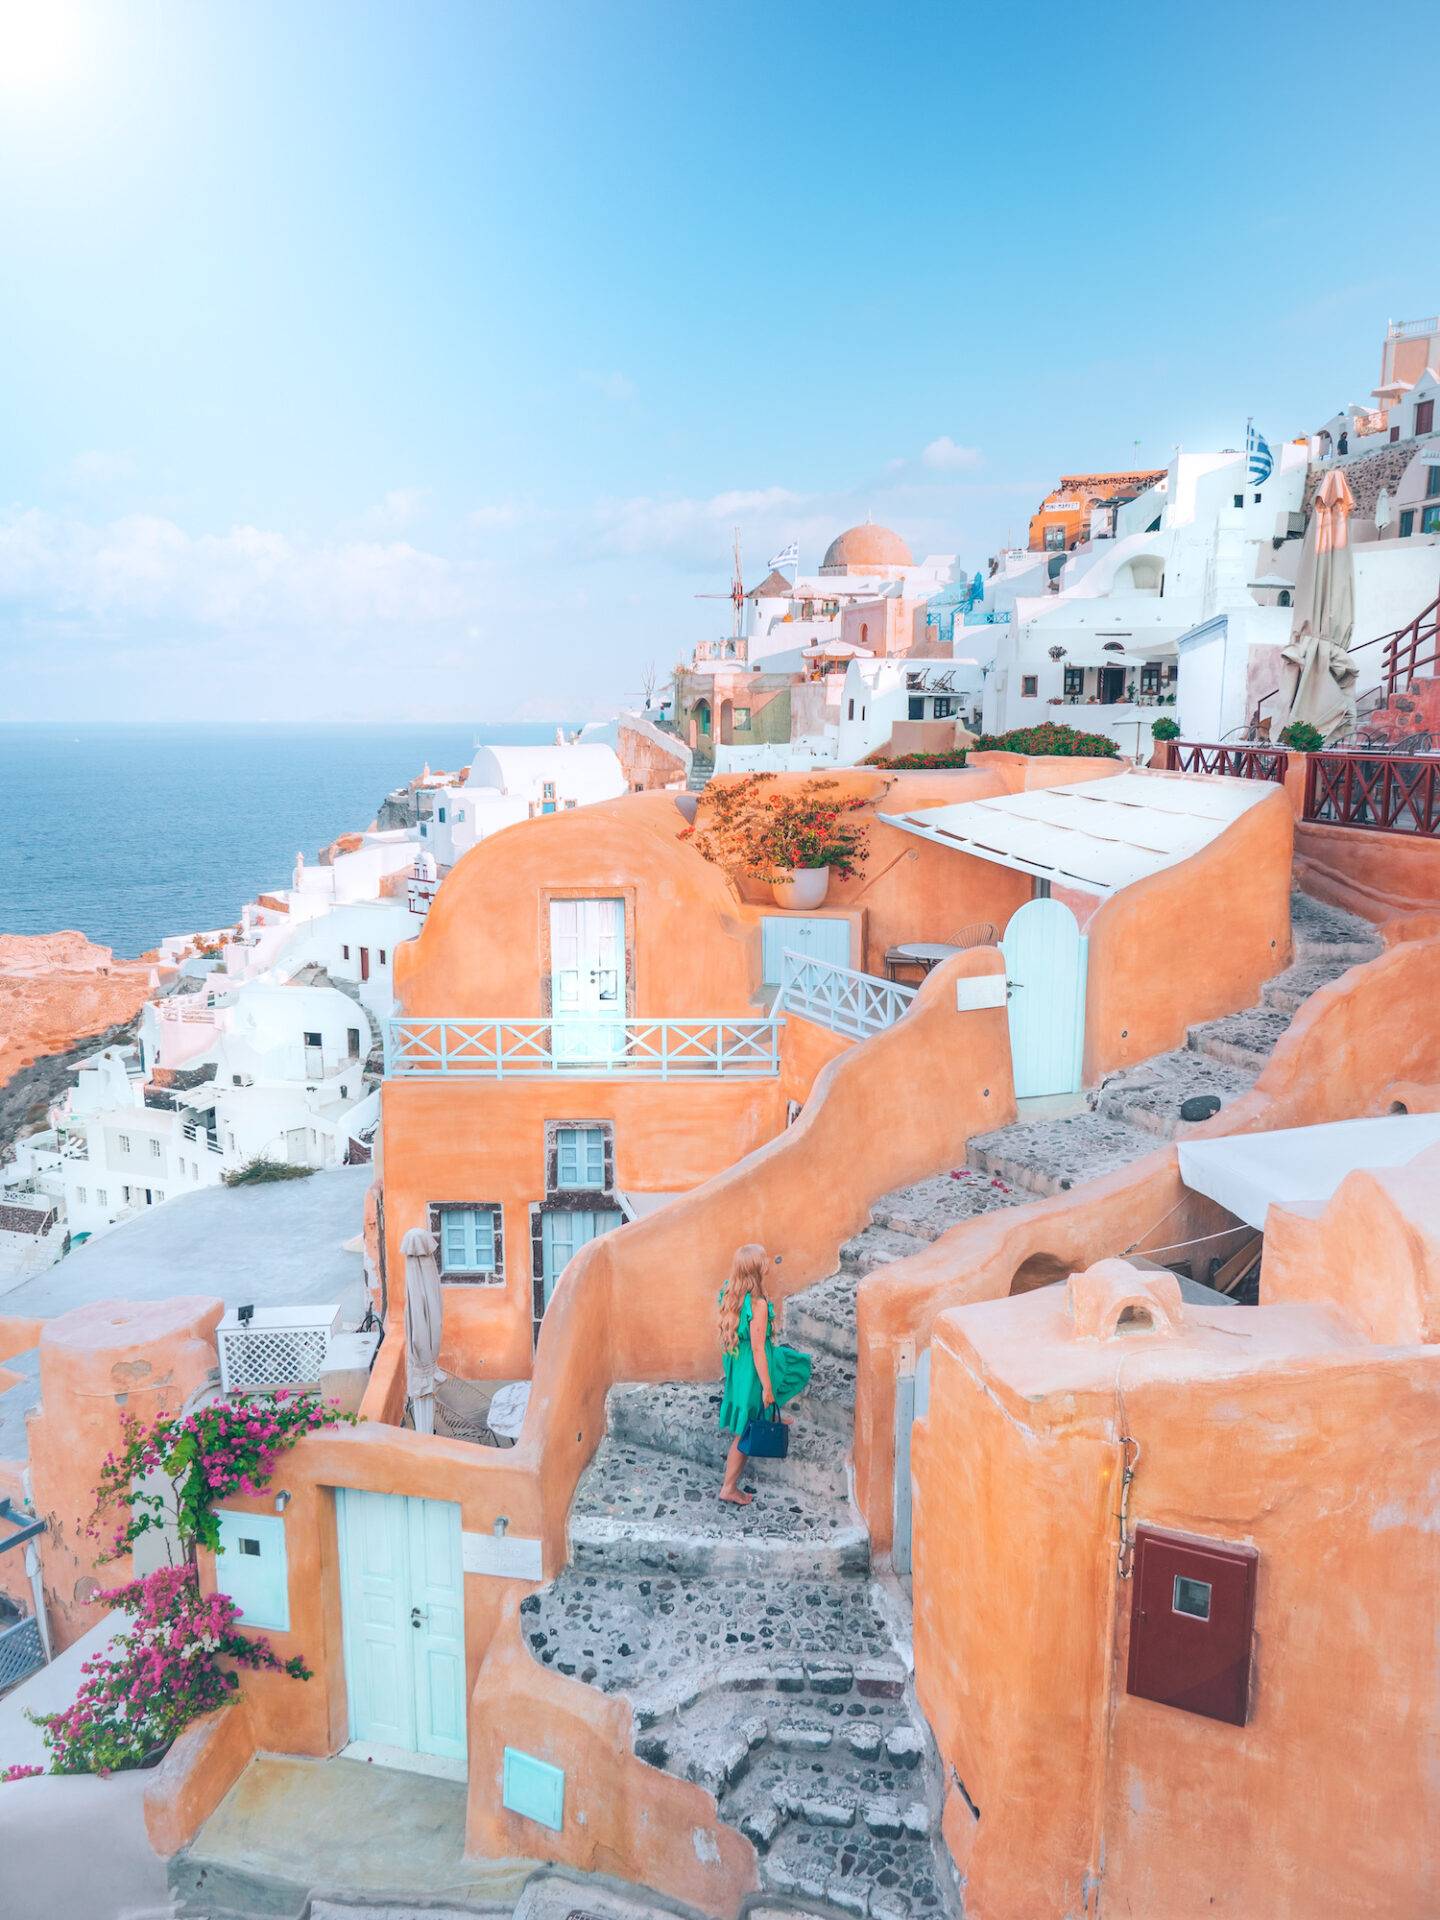 The best photo spots and most instagrammable places in Santorini: Kastro Oia Houses. Click the photo to see the rest of my list of the best instagram photo spots in Santorini!